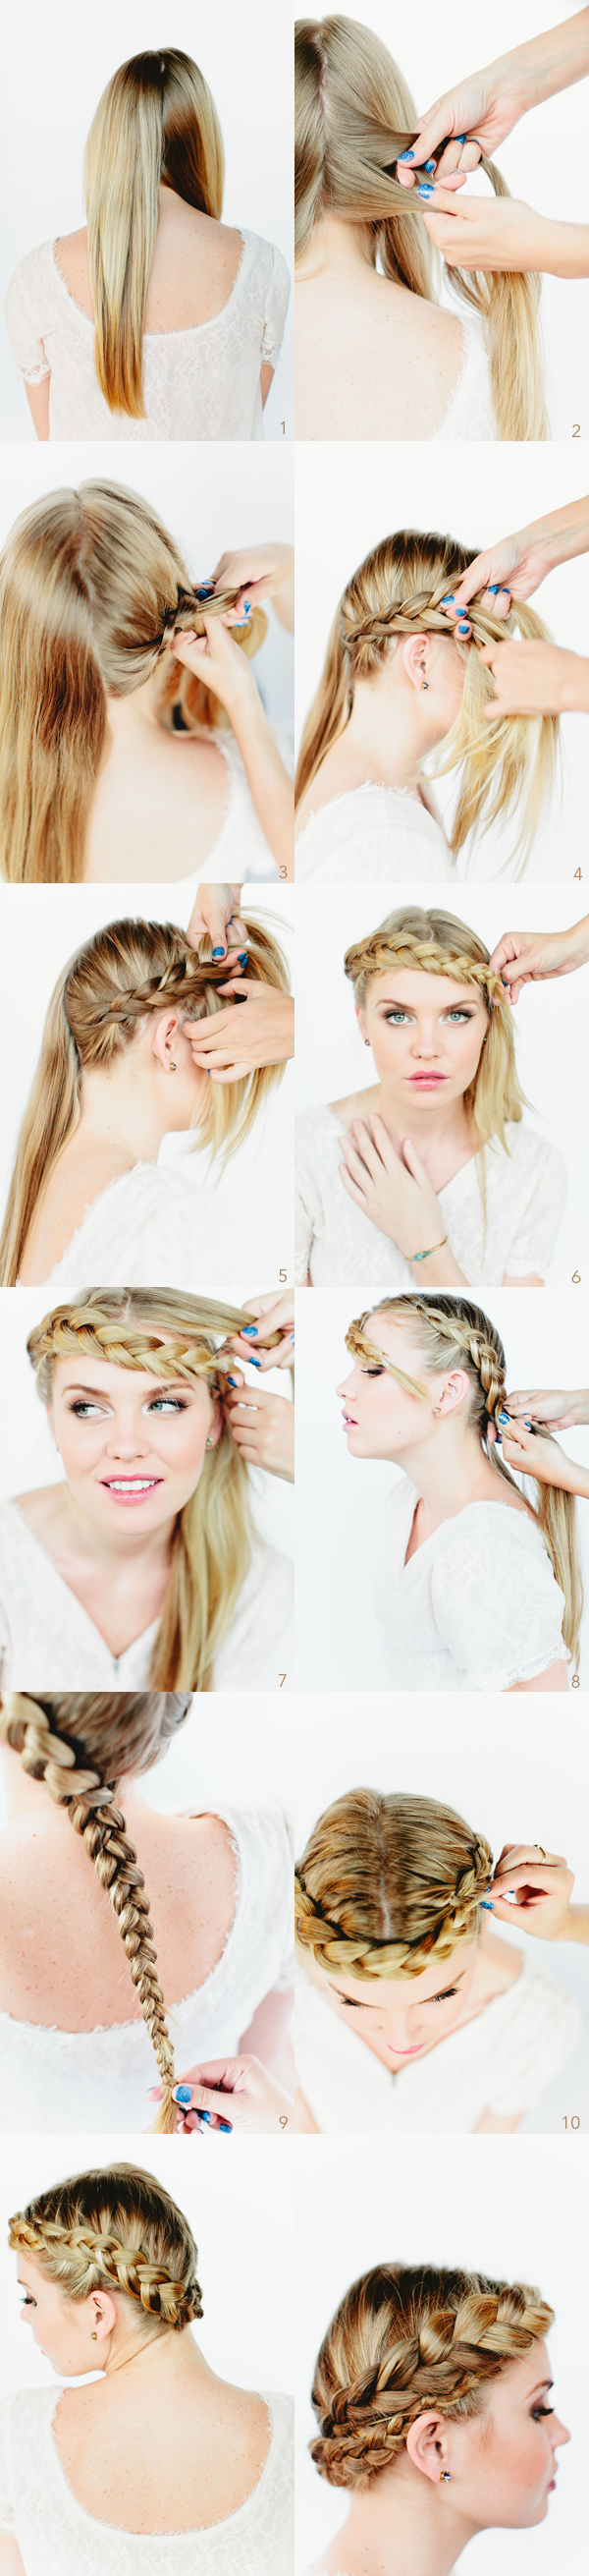 Beautiful tutorial for braided crown hairstyles